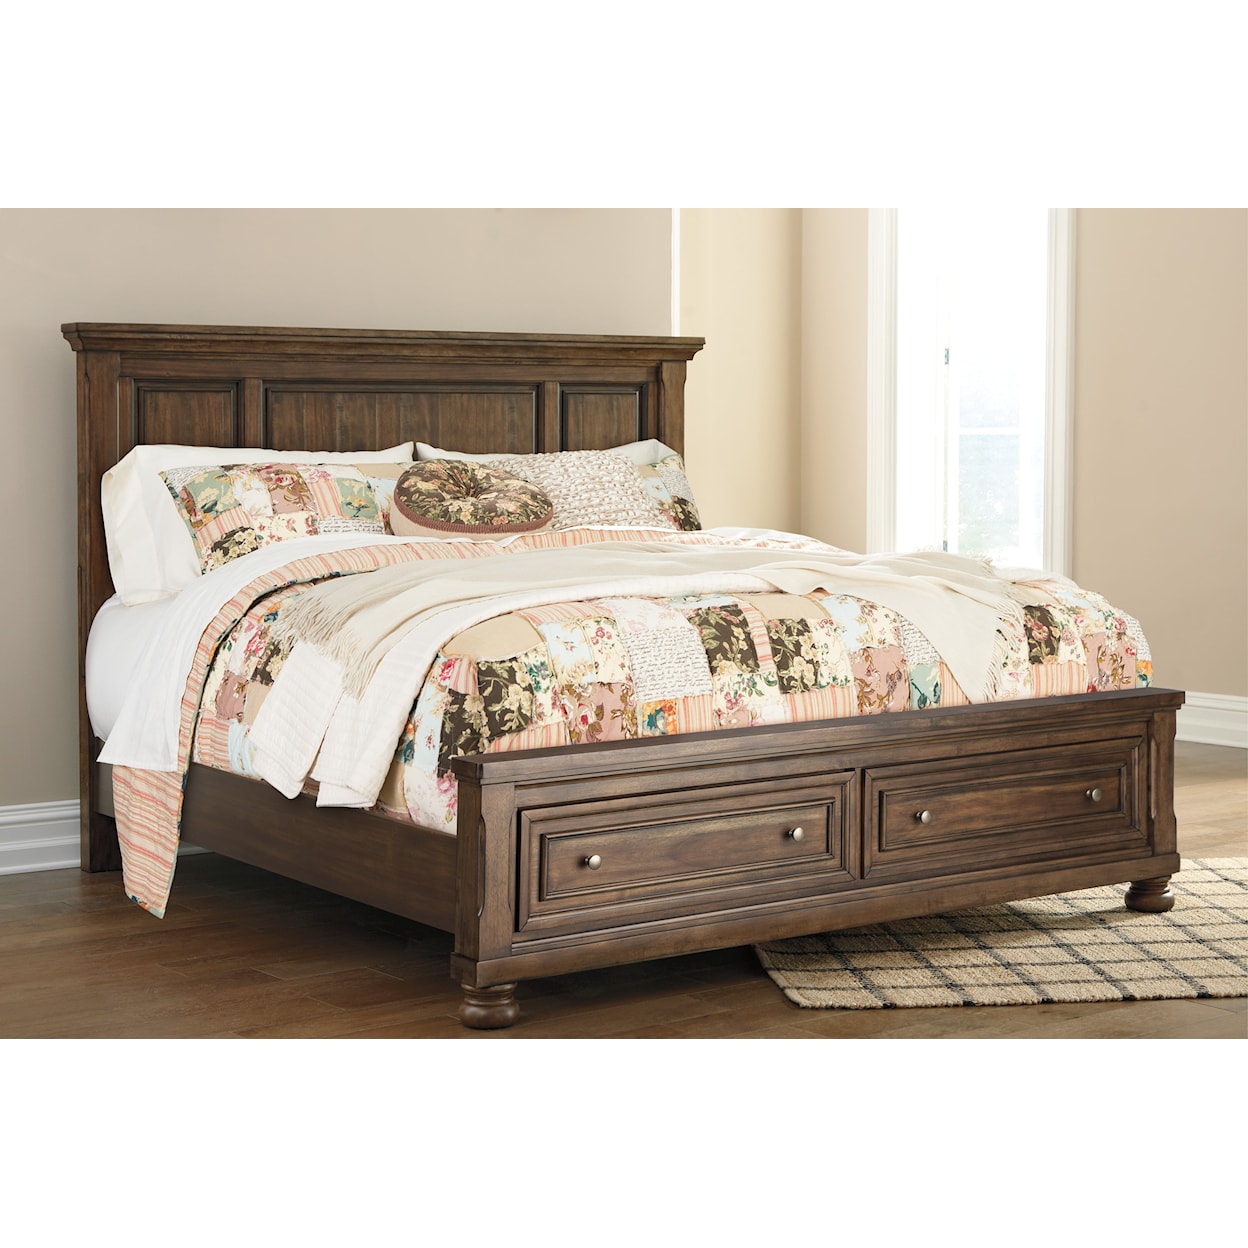 Signature Design by Ashley Flynnter California King Panel Bed with Storage